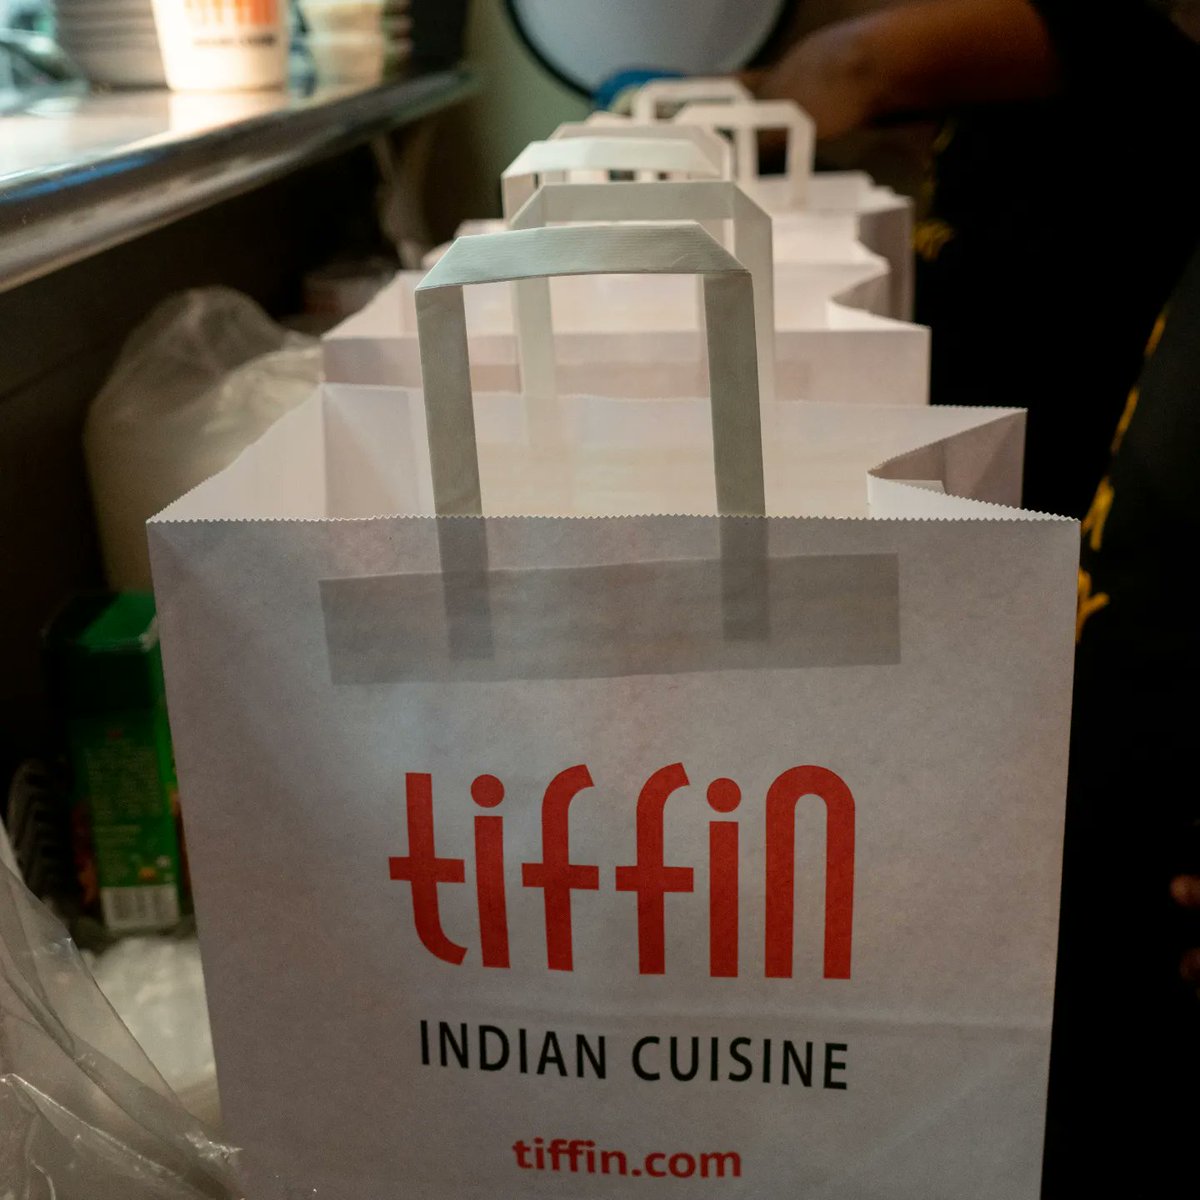 Start your weekend off right with tiffin!

#tiffinindian 
#indianfoodphilly 
#tiffinmalvern 
#phillyrestaurants 
#phillyburbs 
#phillymeals 
#phillyfood 
#phillydinner 
#phillyeats 
#phillydining